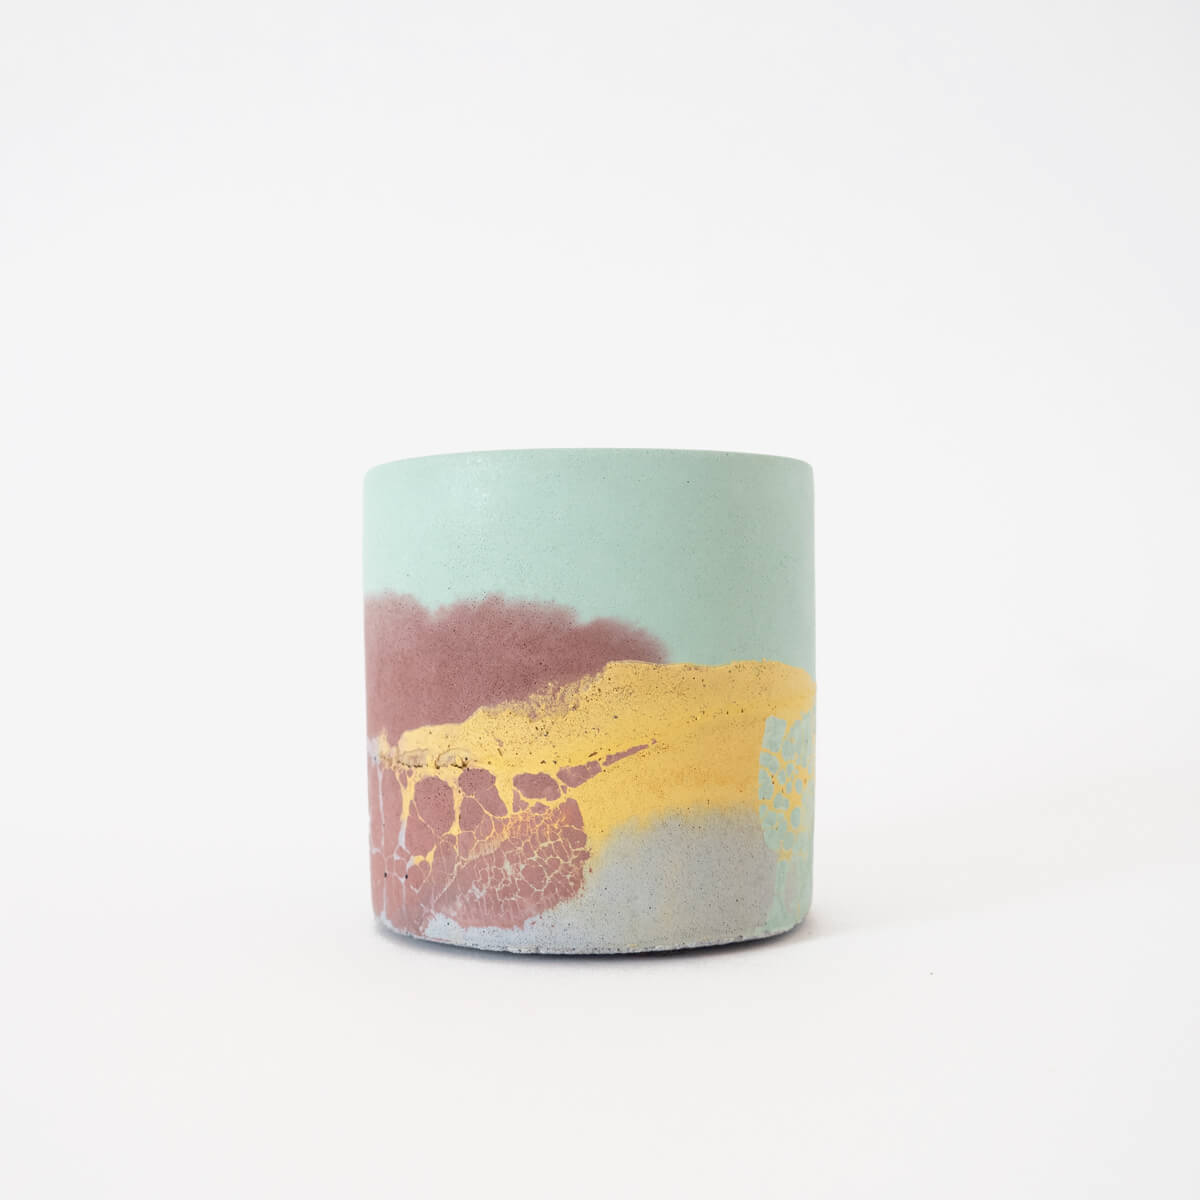 A small round concrete planter with a soft colour palette of yellow, mint, brown and lilac hues.